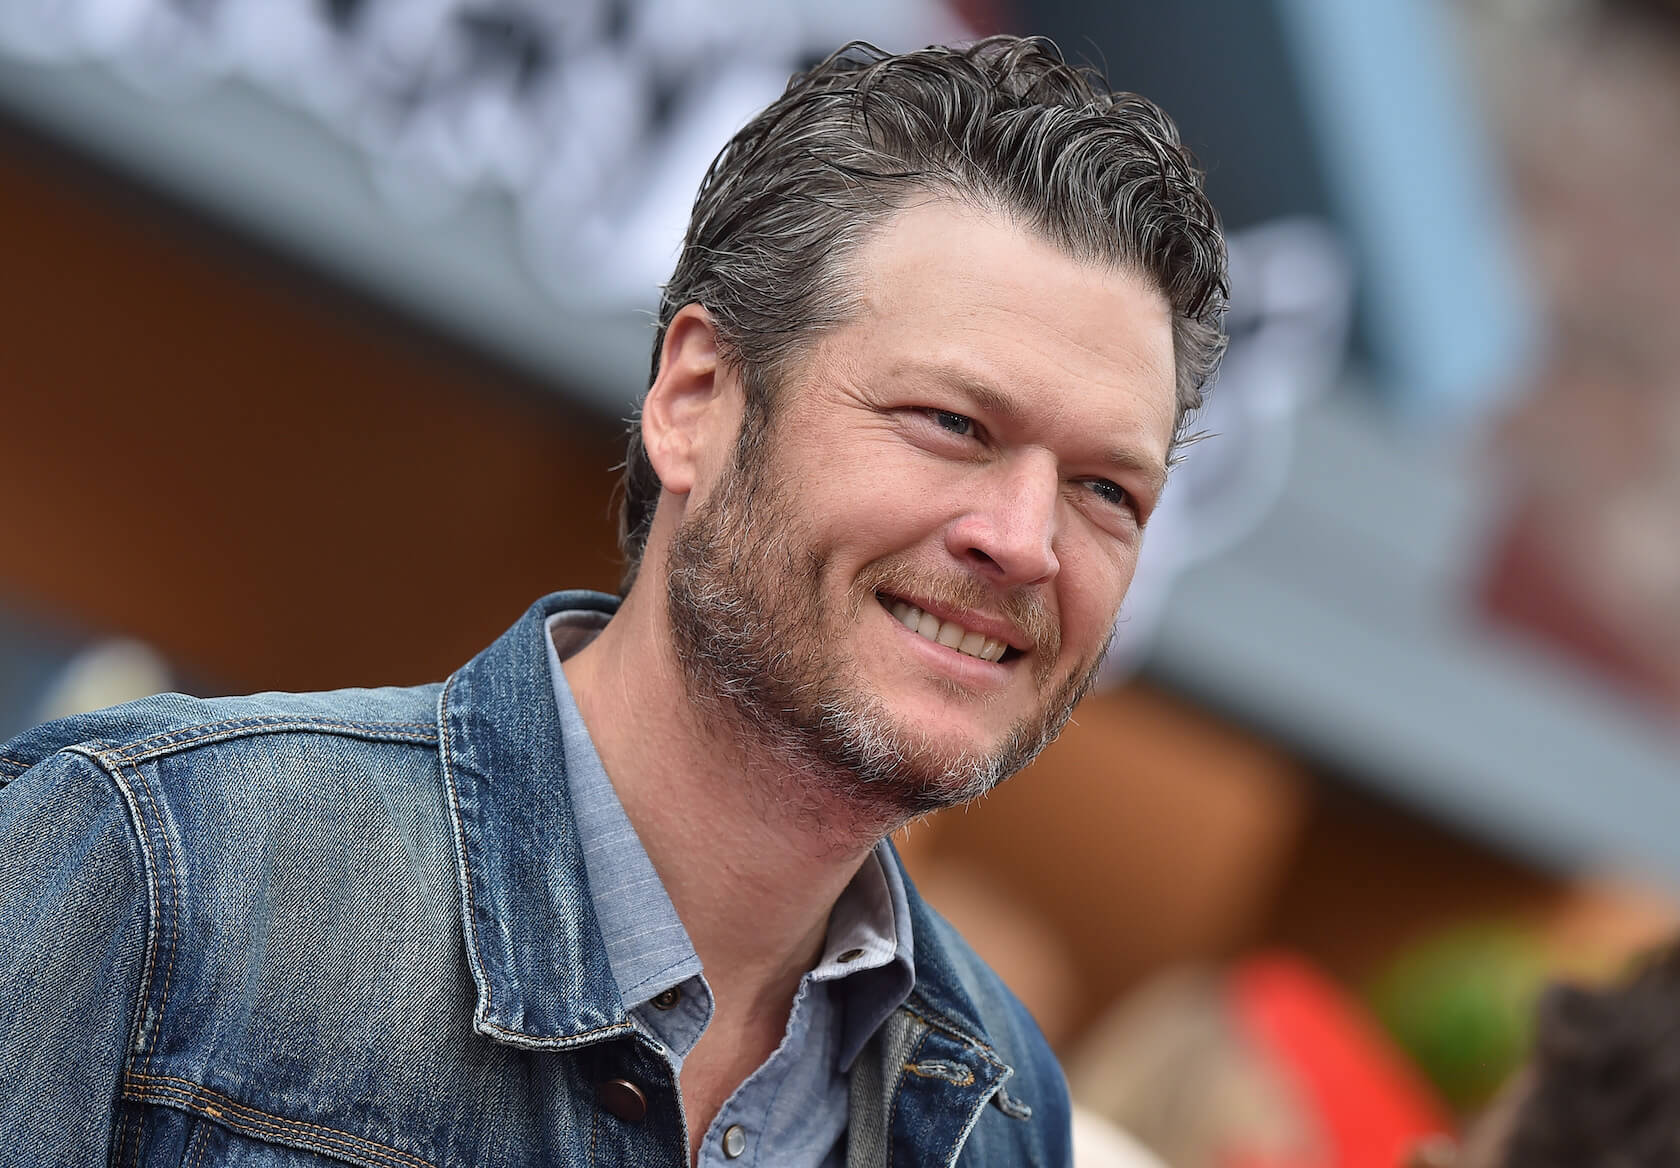 A close-up of 'The Voice' coach Blake Shelton smiling outdoors. He's wearing a denim jacket